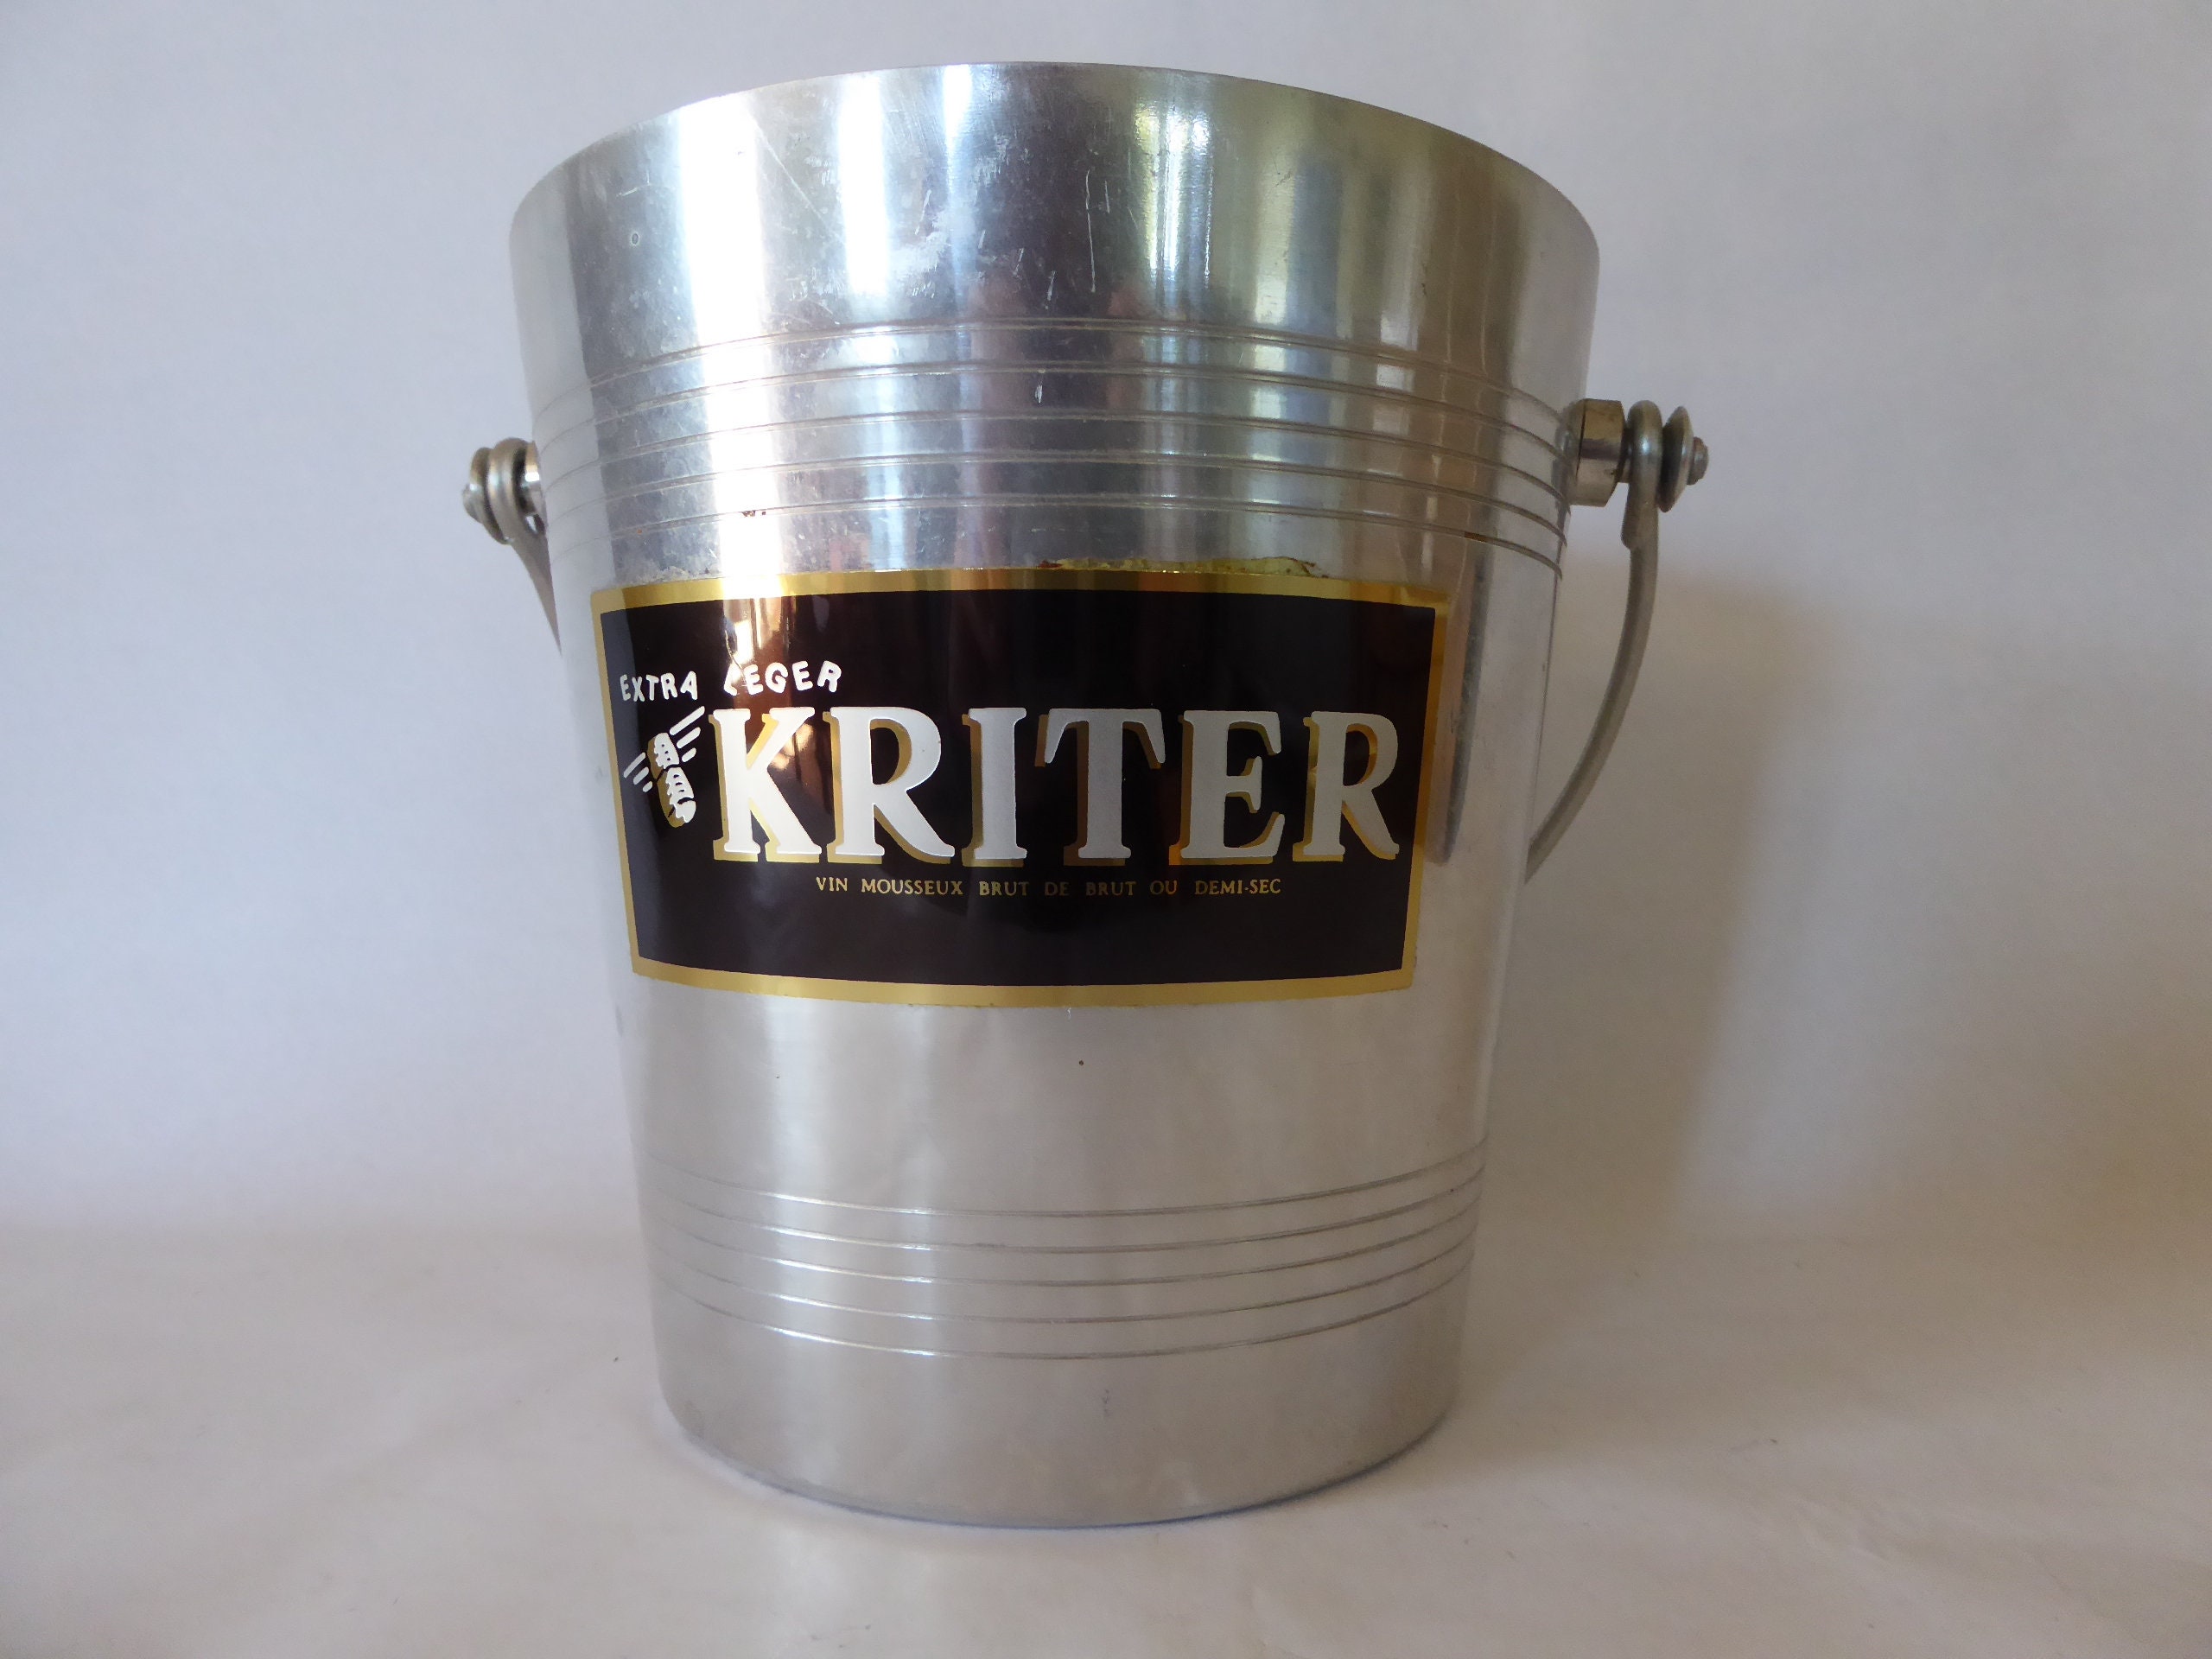 Four 4 Bucket Caddy / Carrier - Painted Metal Buckets in Copper Color  Carrier